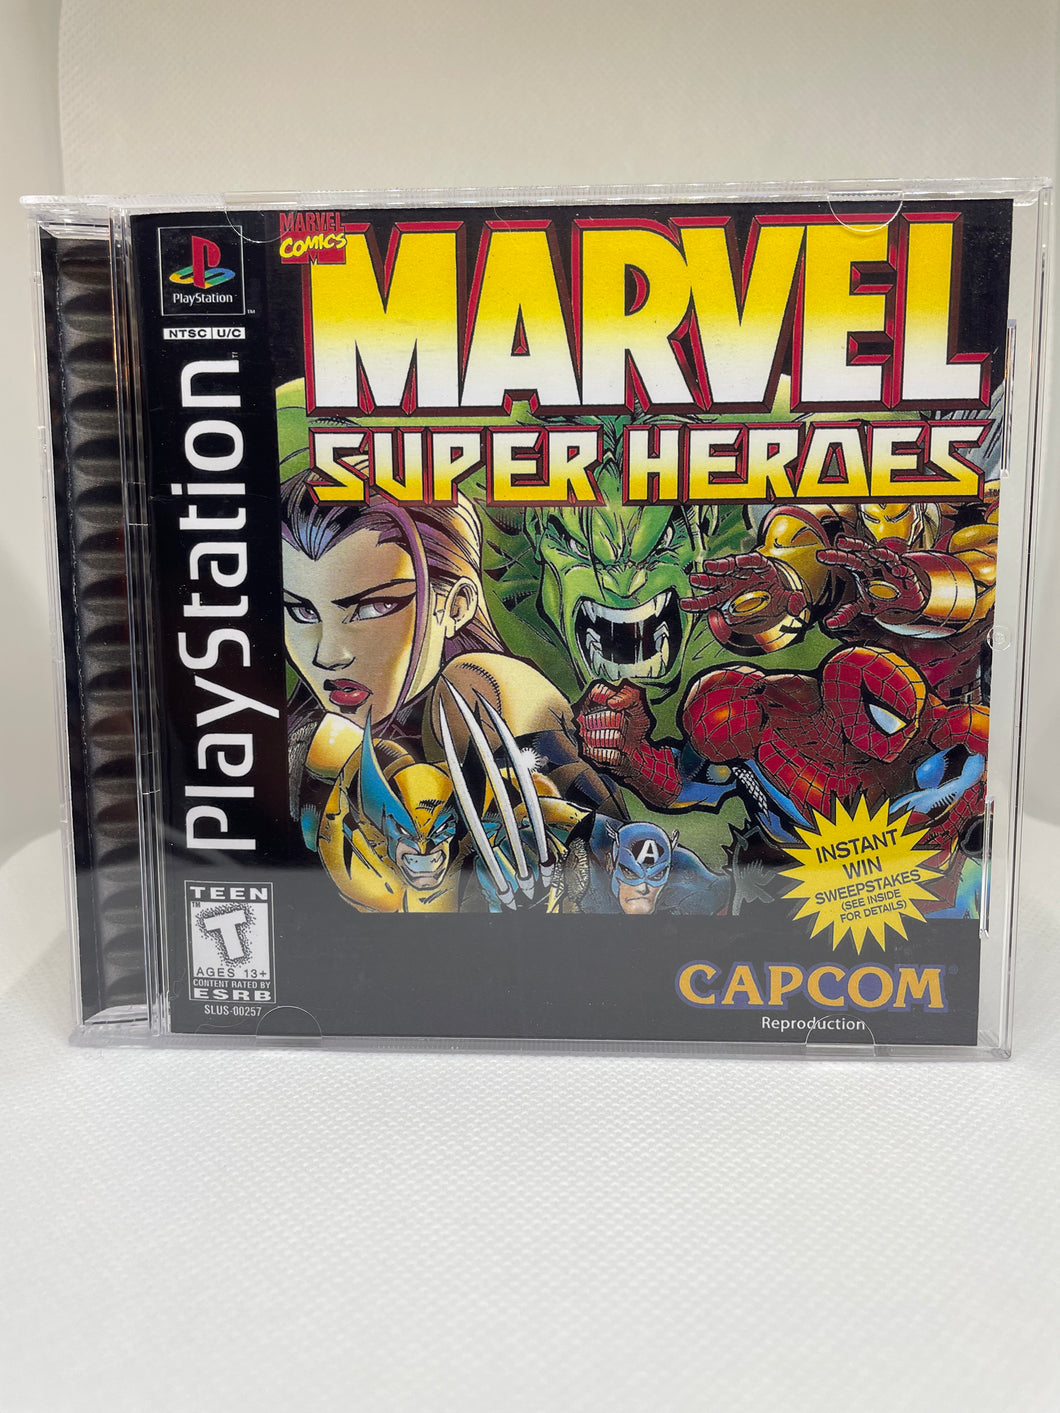 Marvel Super Heroes PS1 Reproduction Case